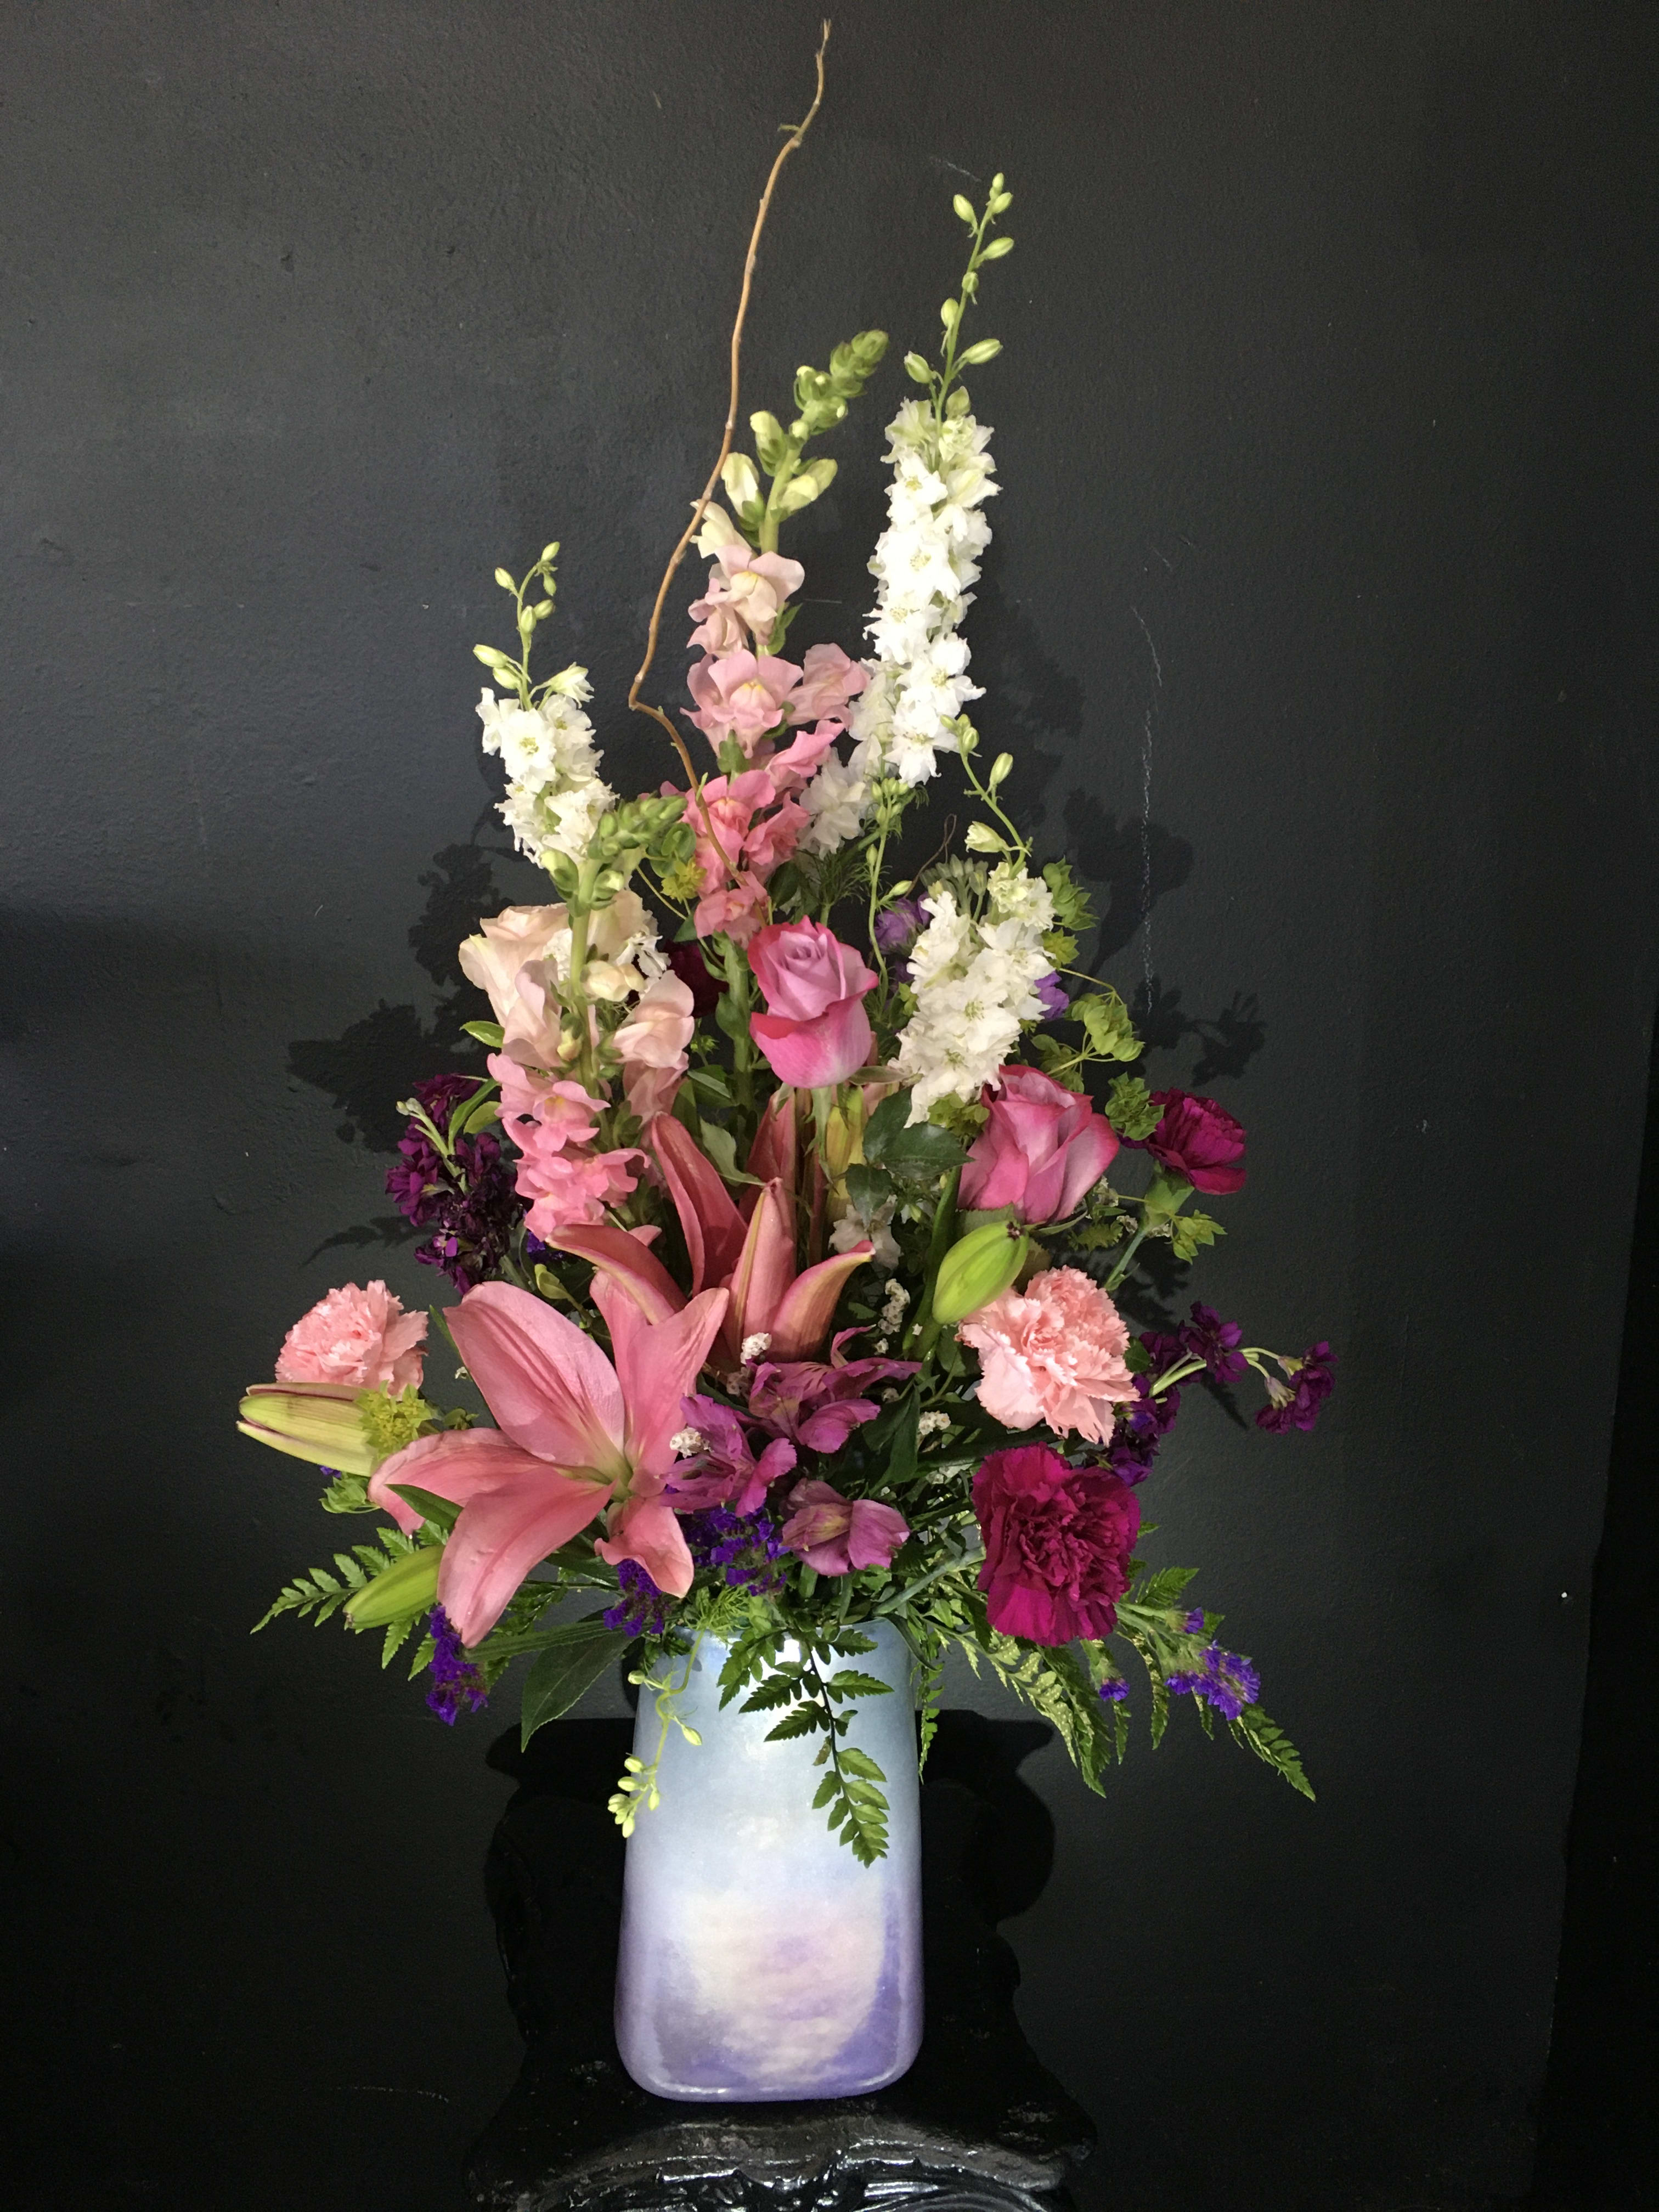 My Mom Rocks - an awesome display of soft colors in an exquisite vase Mom will love